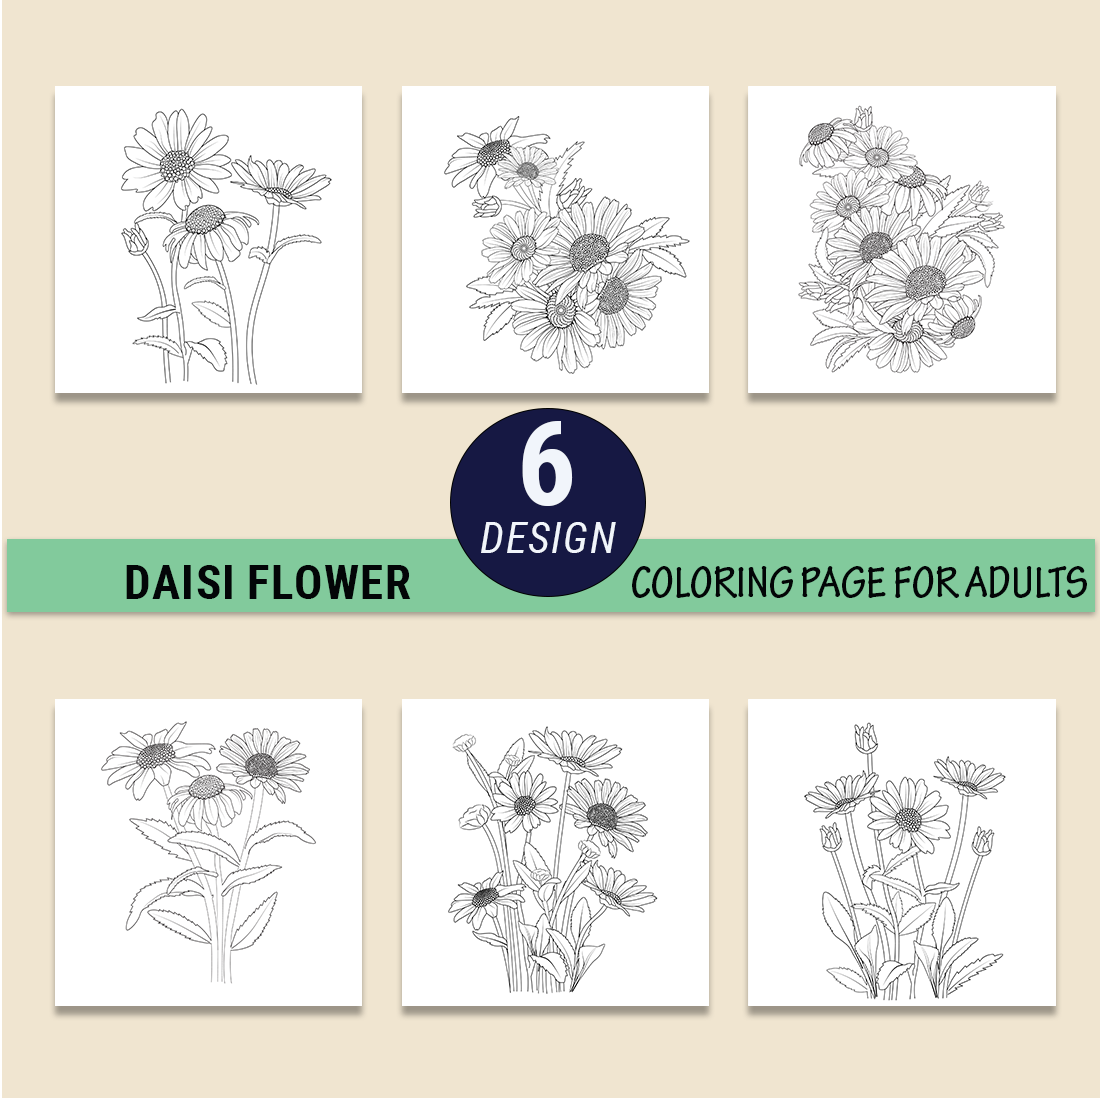 Daisy flower coloring pages, daisy flower bouquet tattoo, small daisy tattoo, elegant minimalist daisy tattoo preview image.